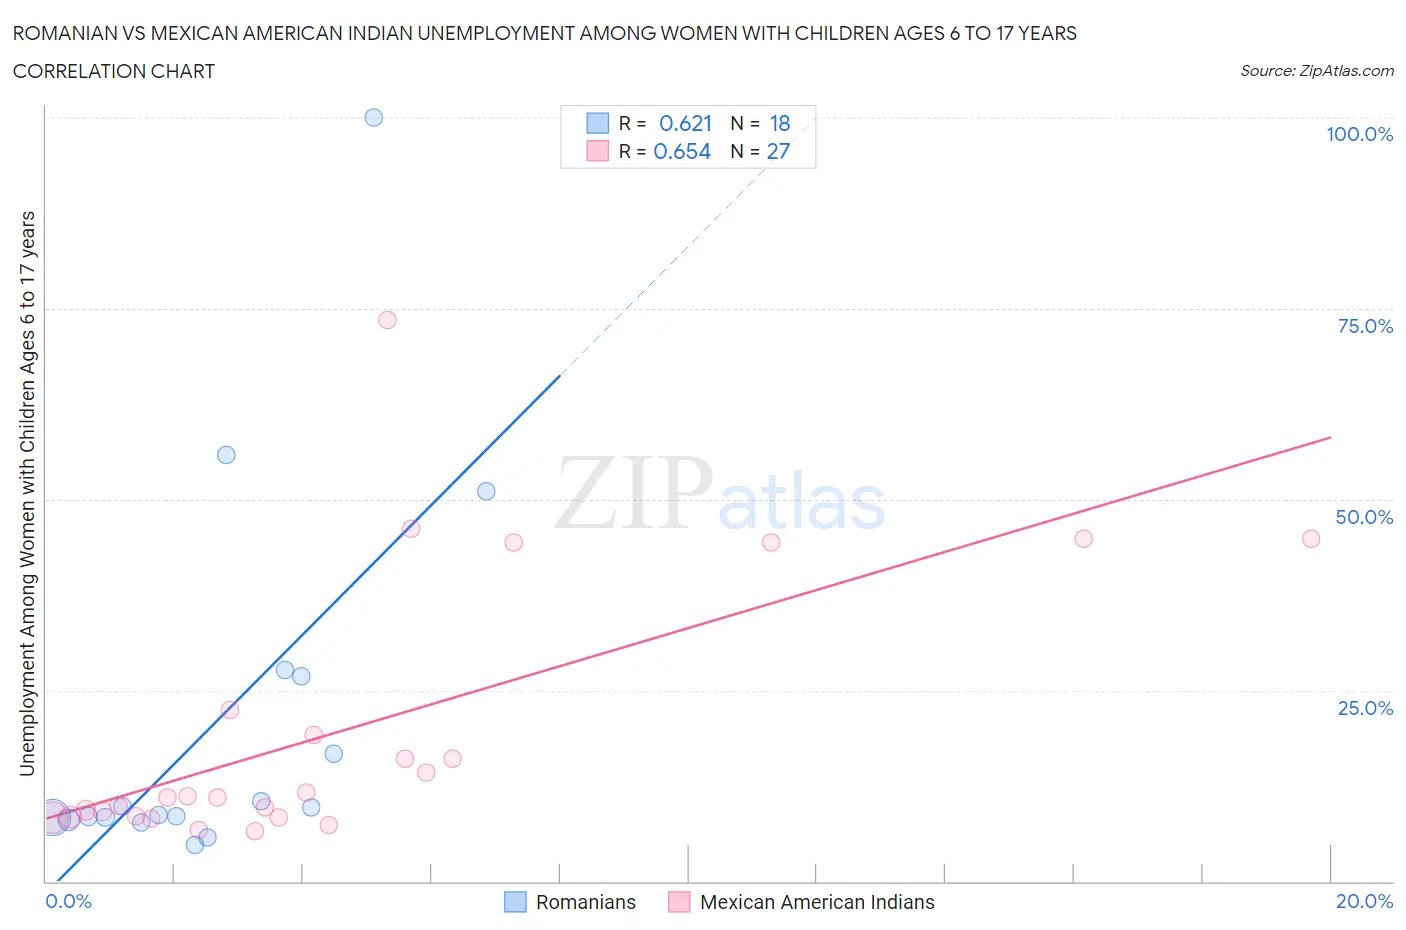 Romanian vs Mexican American Indian Unemployment Among Women with Children Ages 6 to 17 years